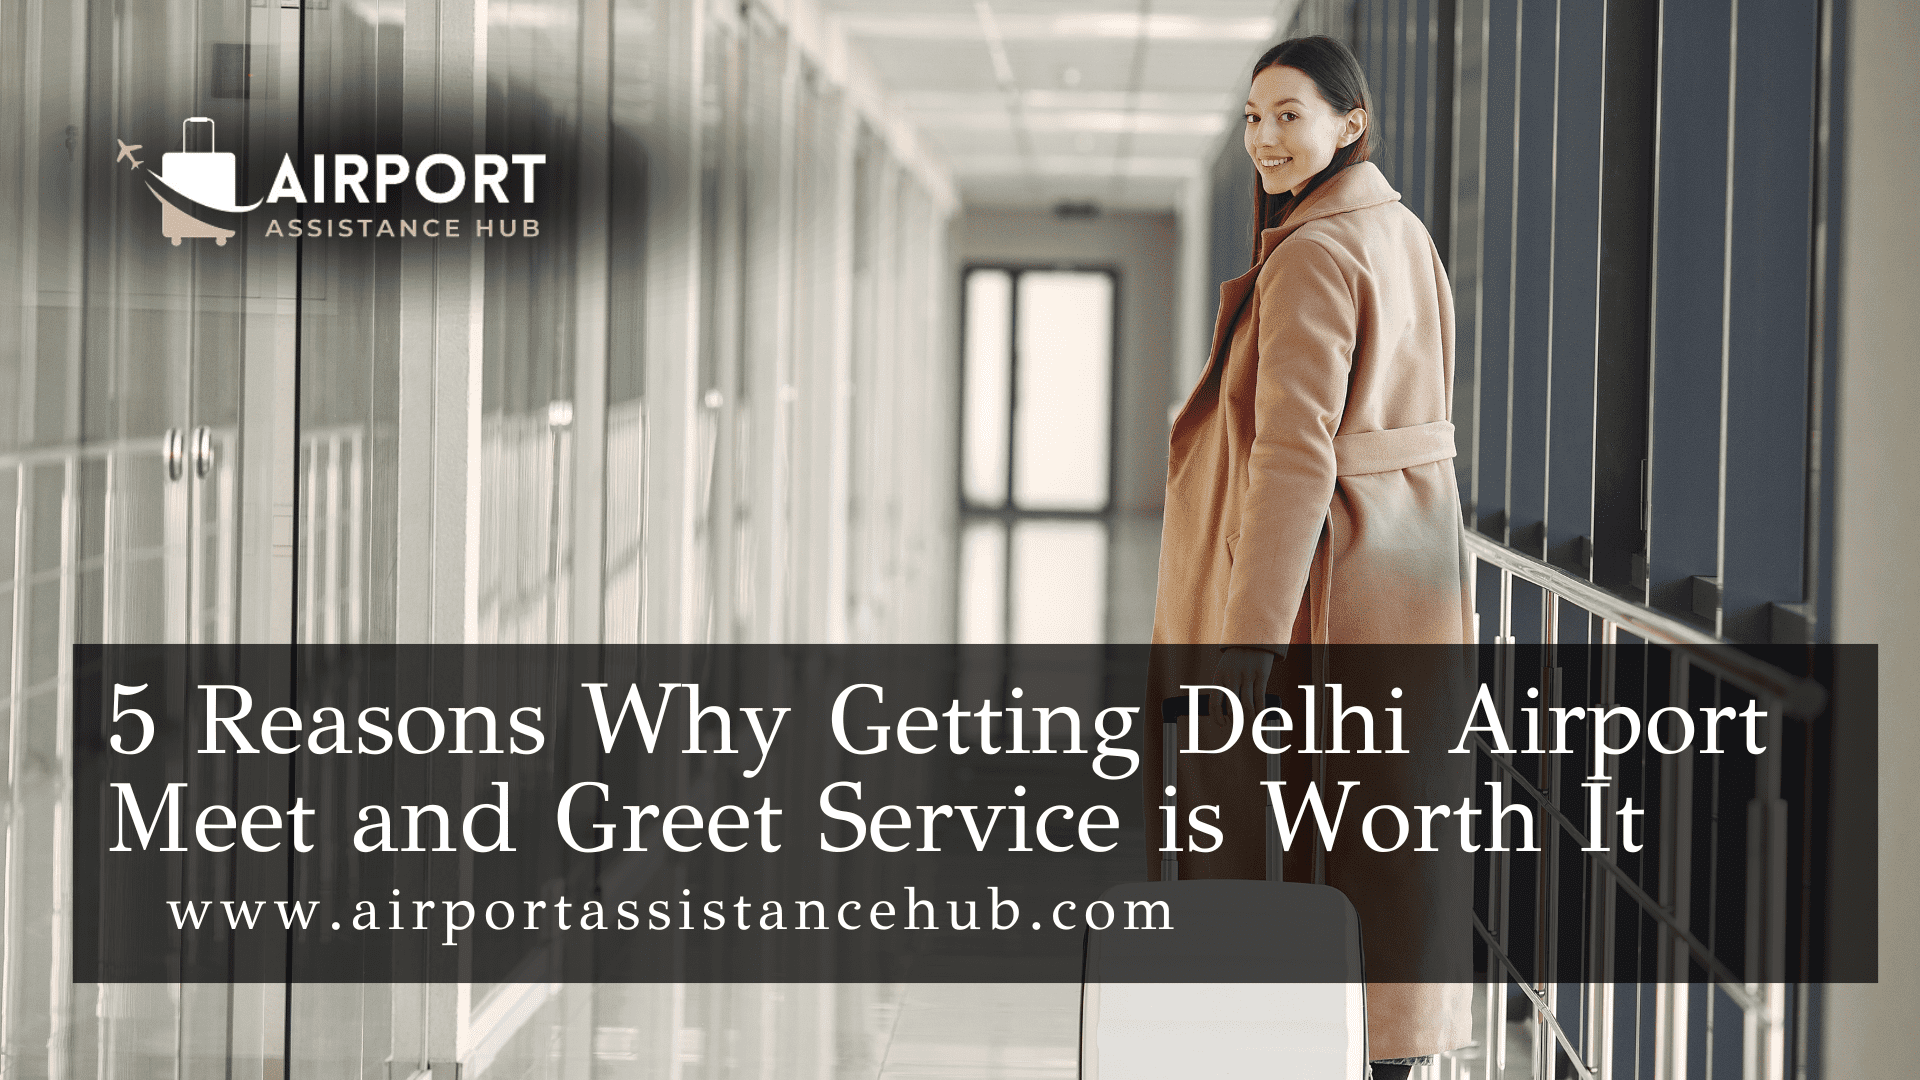 5 Reasons Why Getting Delhi Airport Meet and Greet Service is Worth It